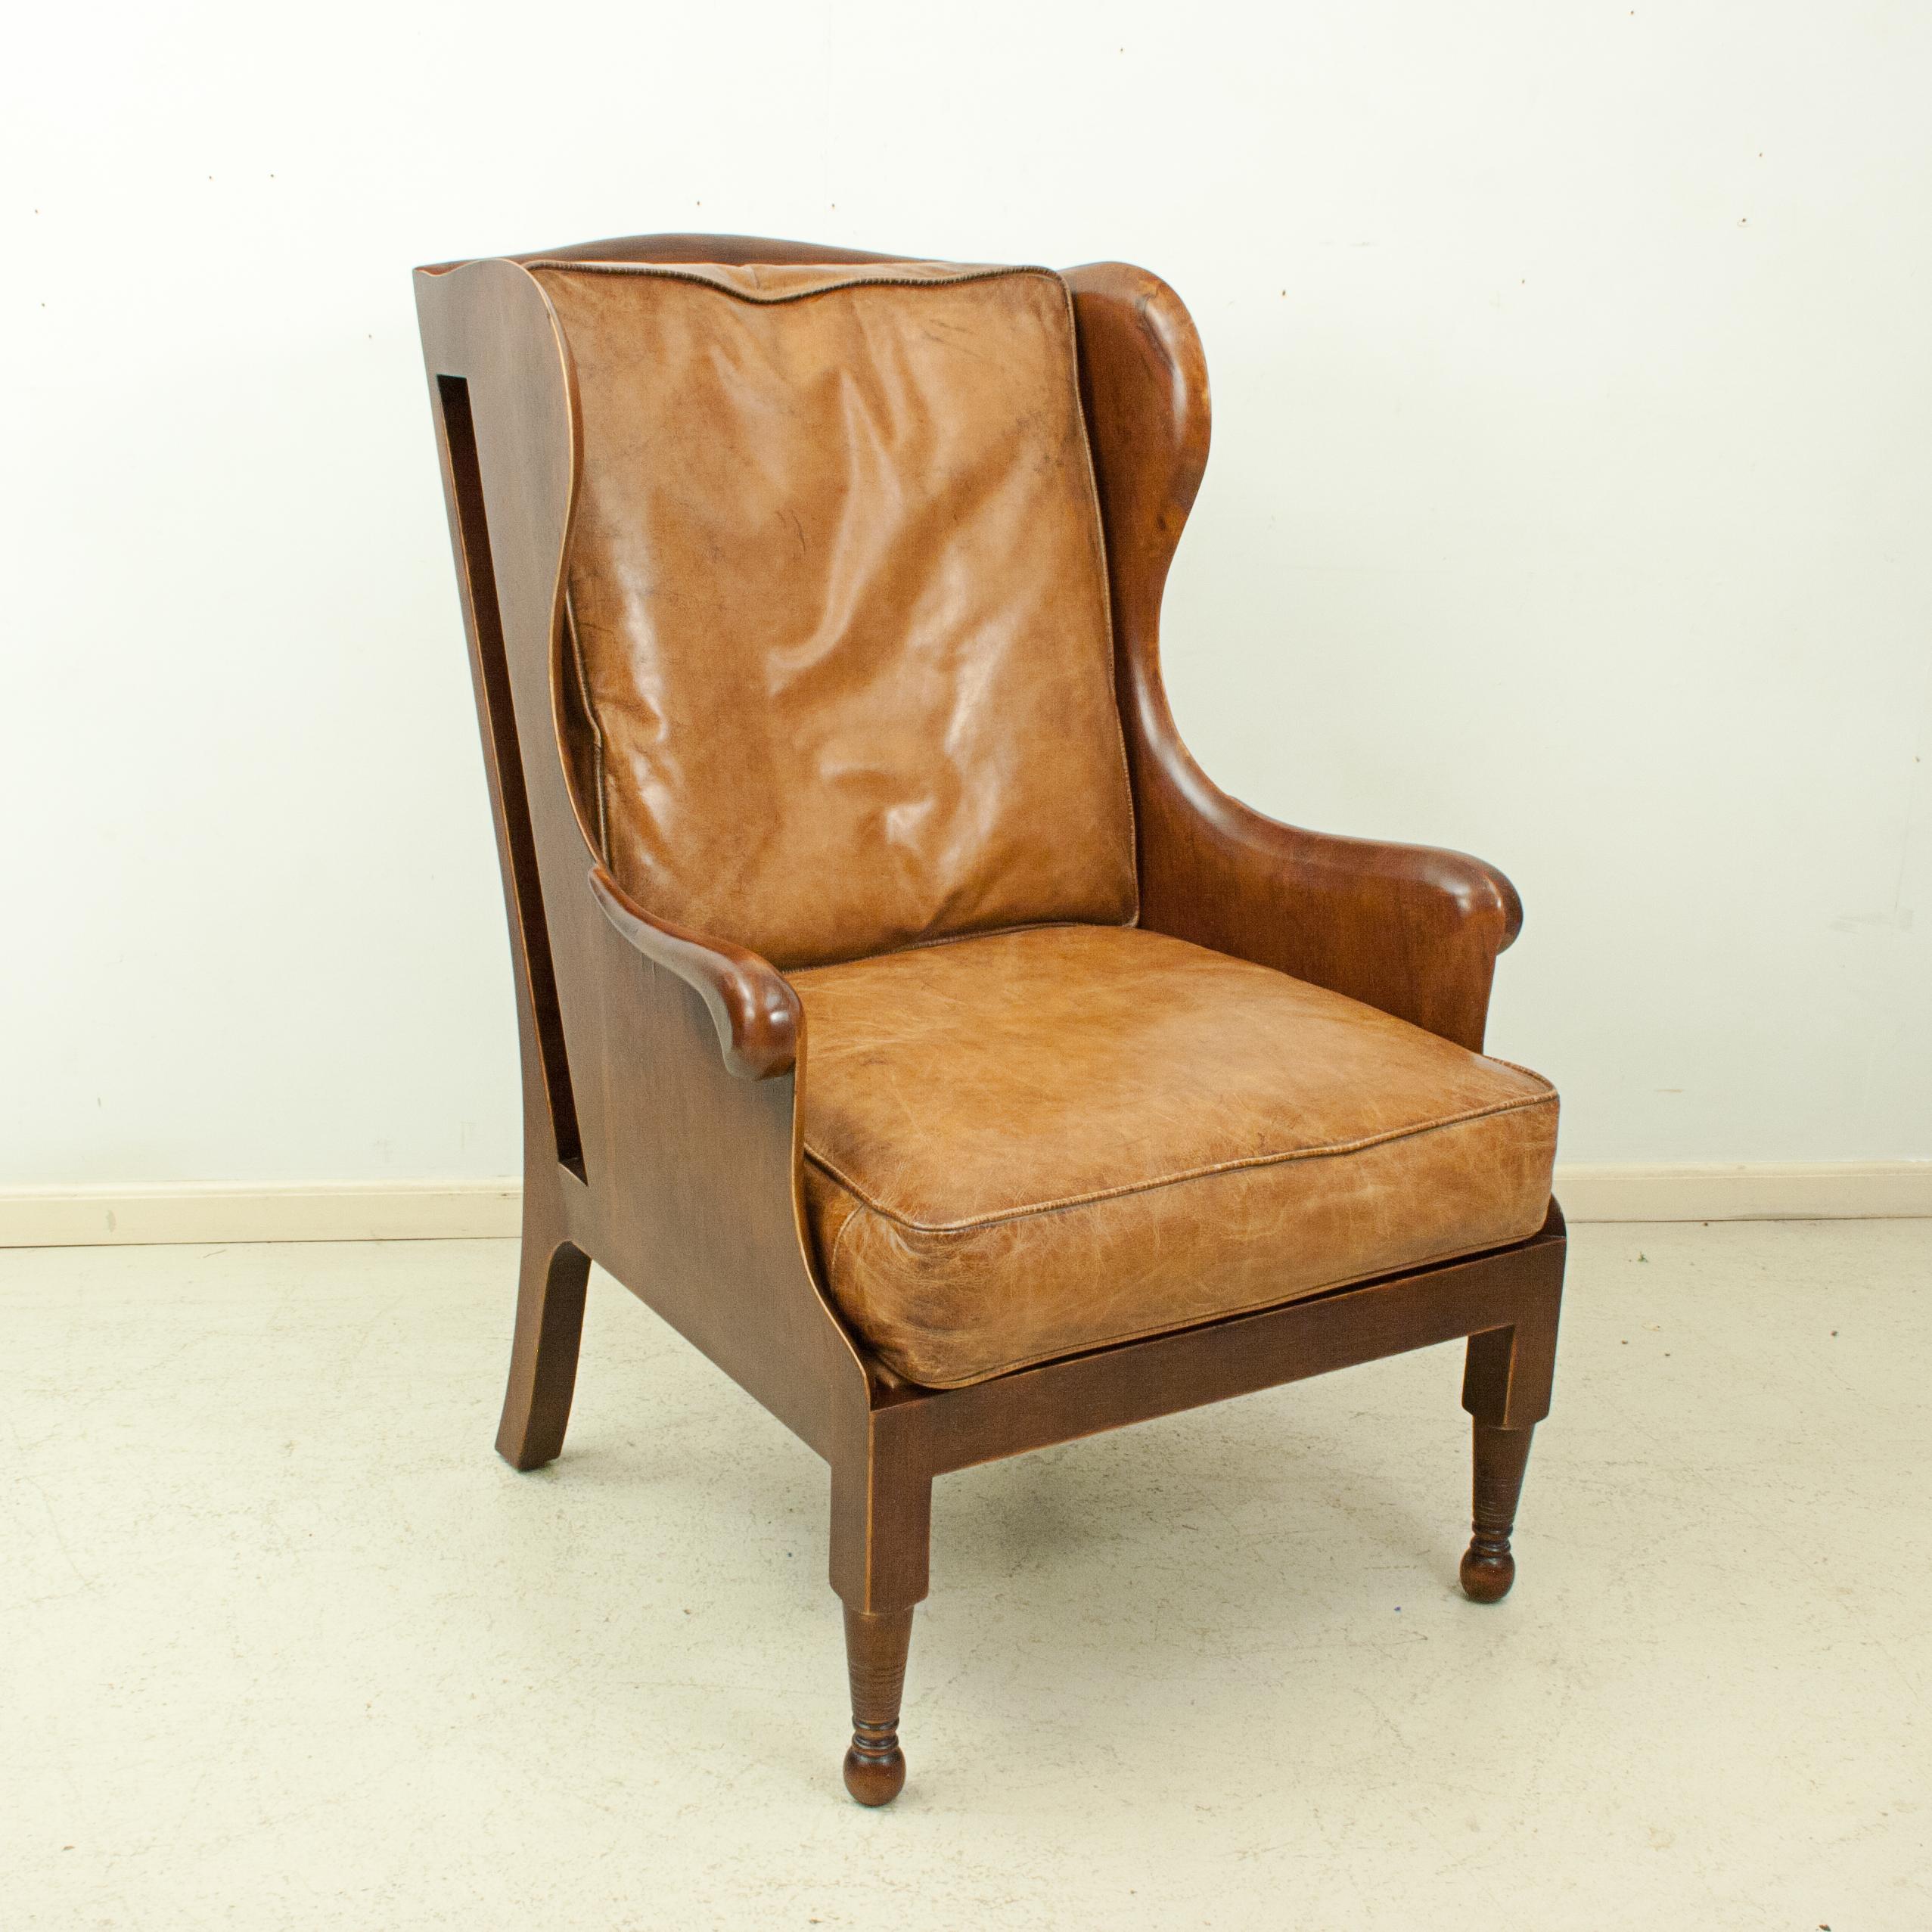 Contemporary Traditional Style Mahogany and Tan Leather Wing Armchair, Loose Cushions